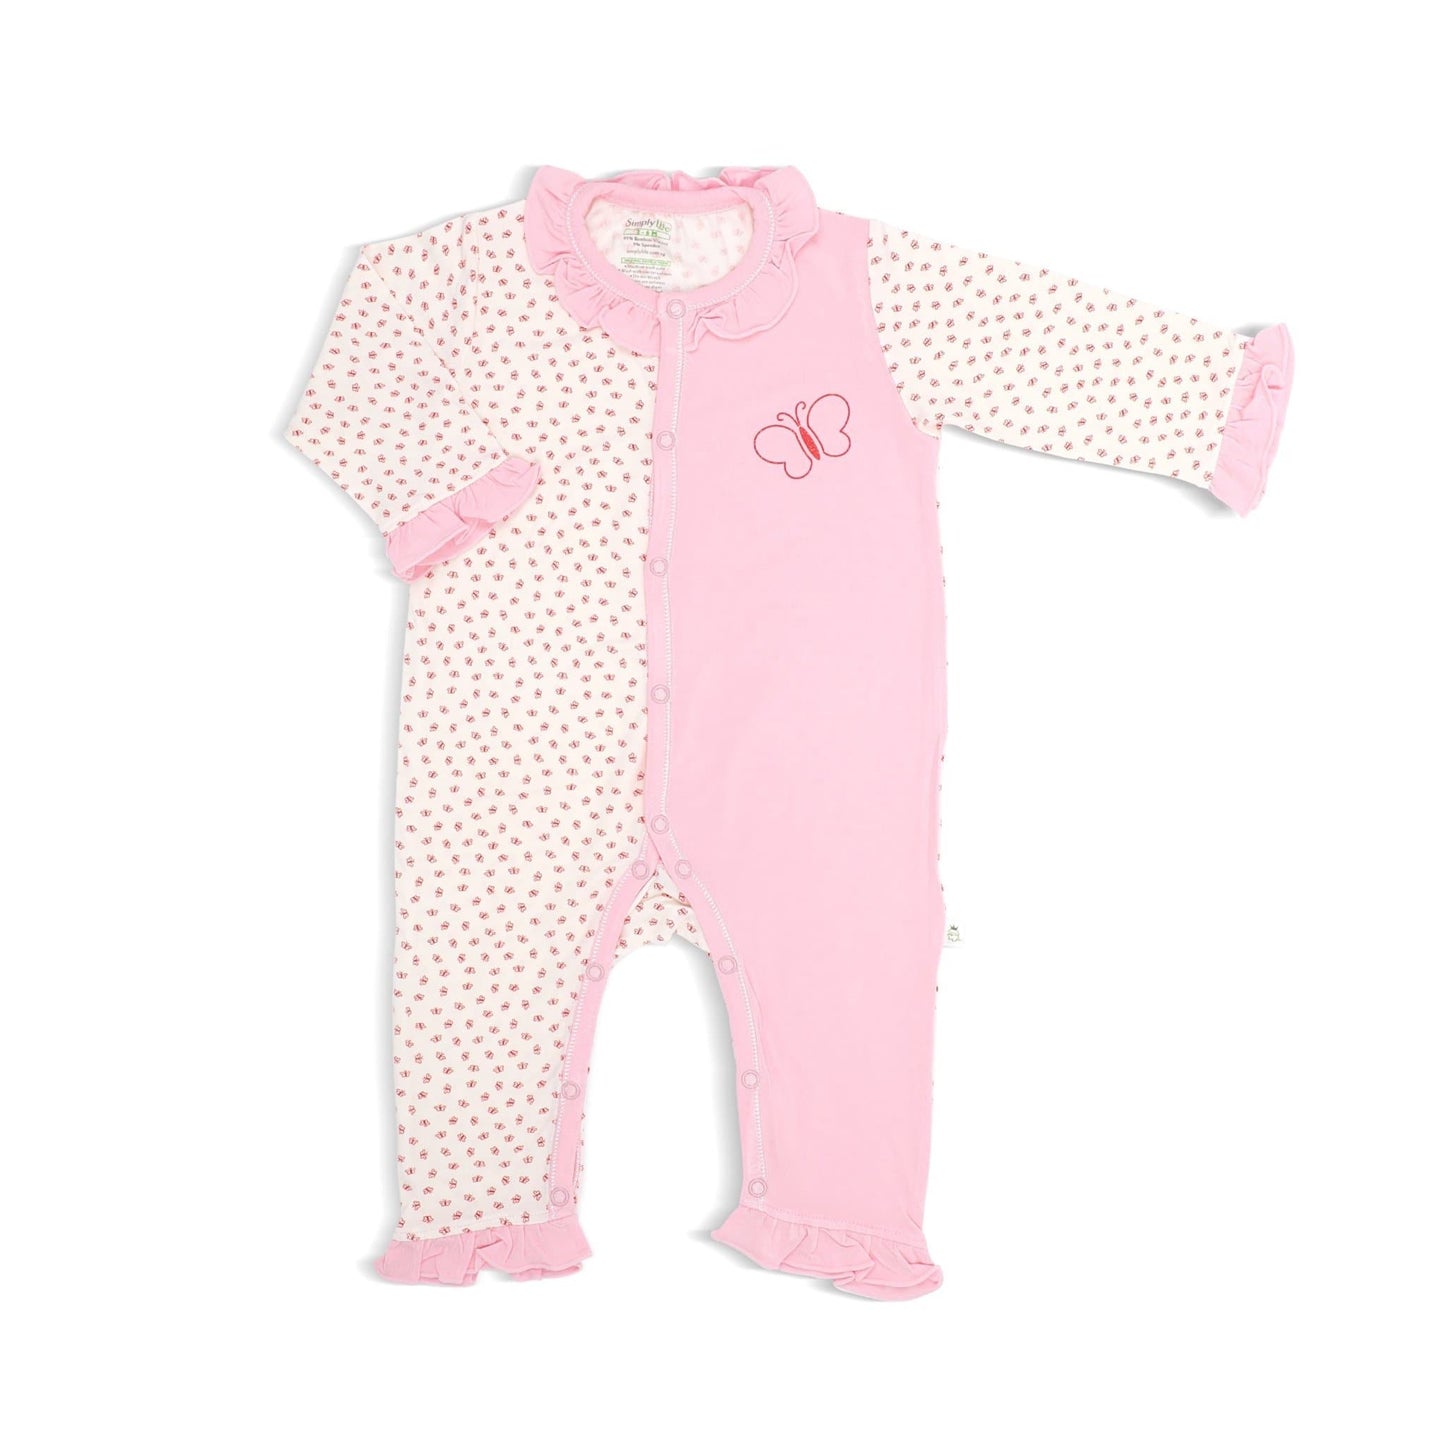 Lovely Butterflies - Long-sleeved Button Sleepsuit with Frills by simplylifebaby